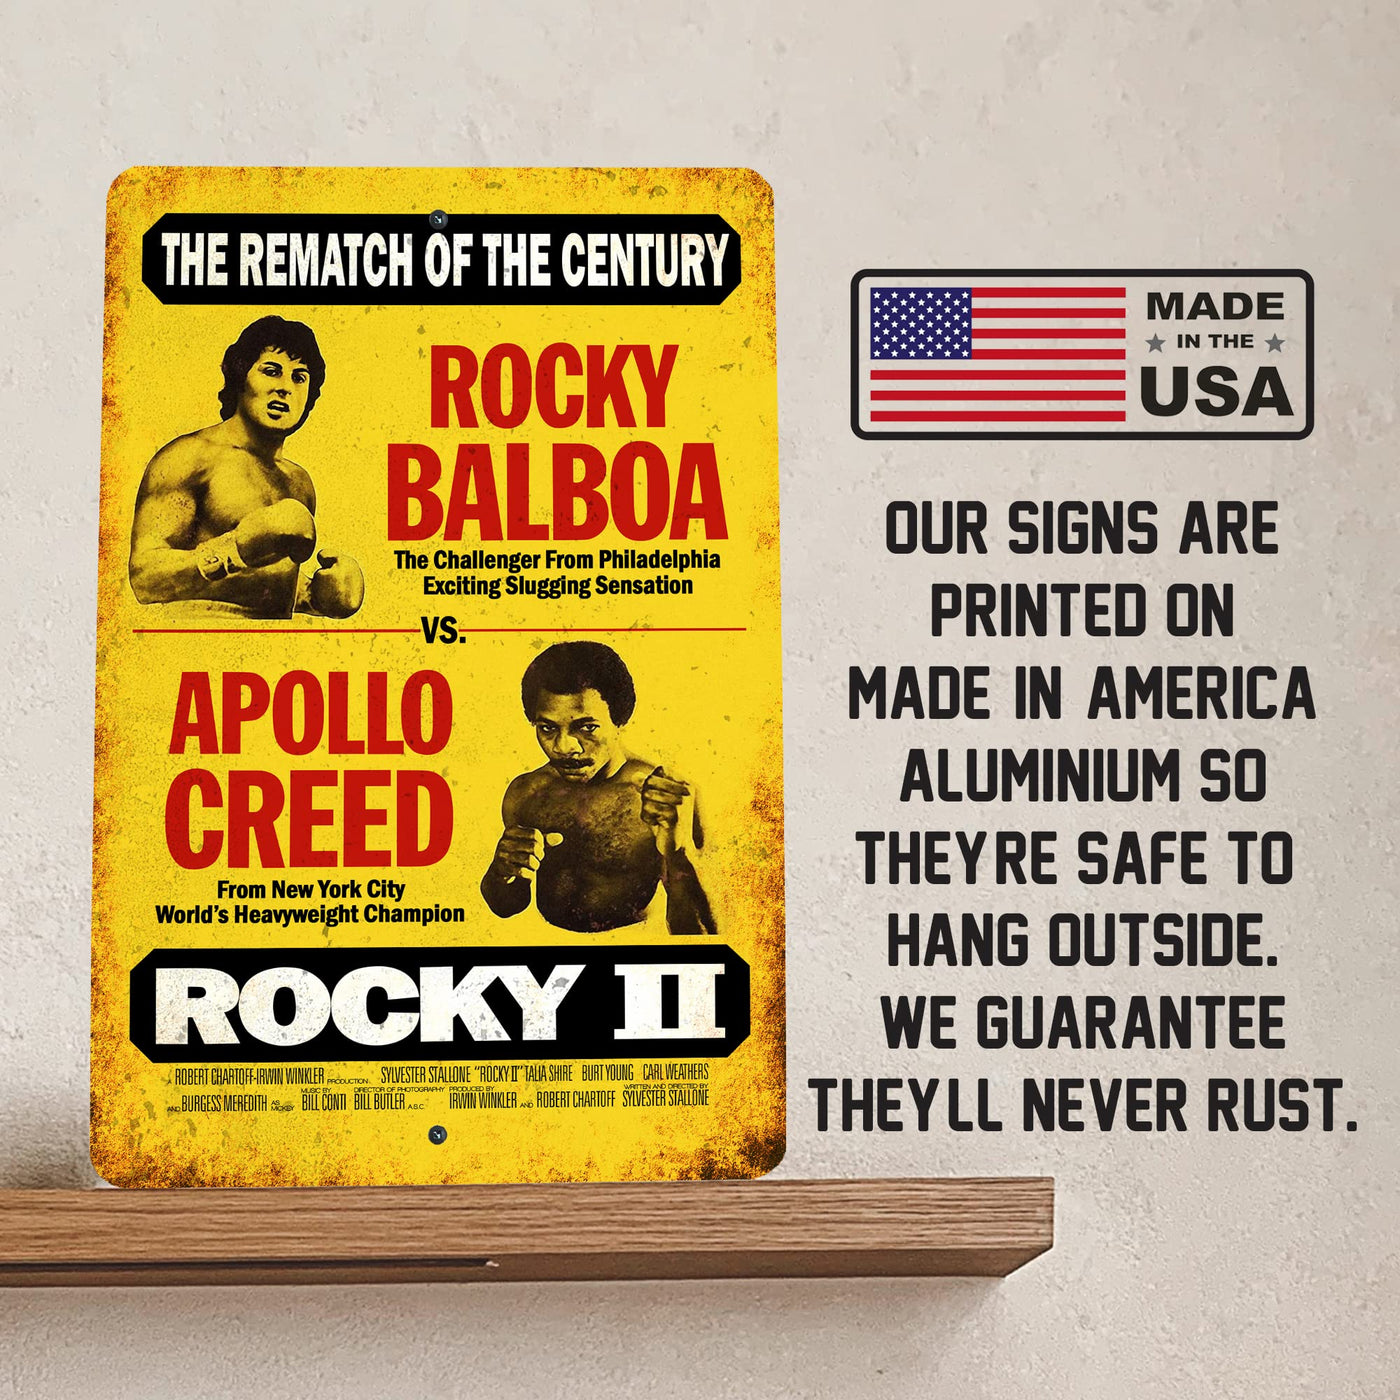 Rocky Balboa vs Apollo Creed Metal Signs Wall Art -Vintage Boxing Movie Sign -8 x 12 Inch Rustic Tin Sign for Home, Office, Bar, Man Cave Decor. Perfect Retro Metal Sign for the Gym! Classic Gifts!